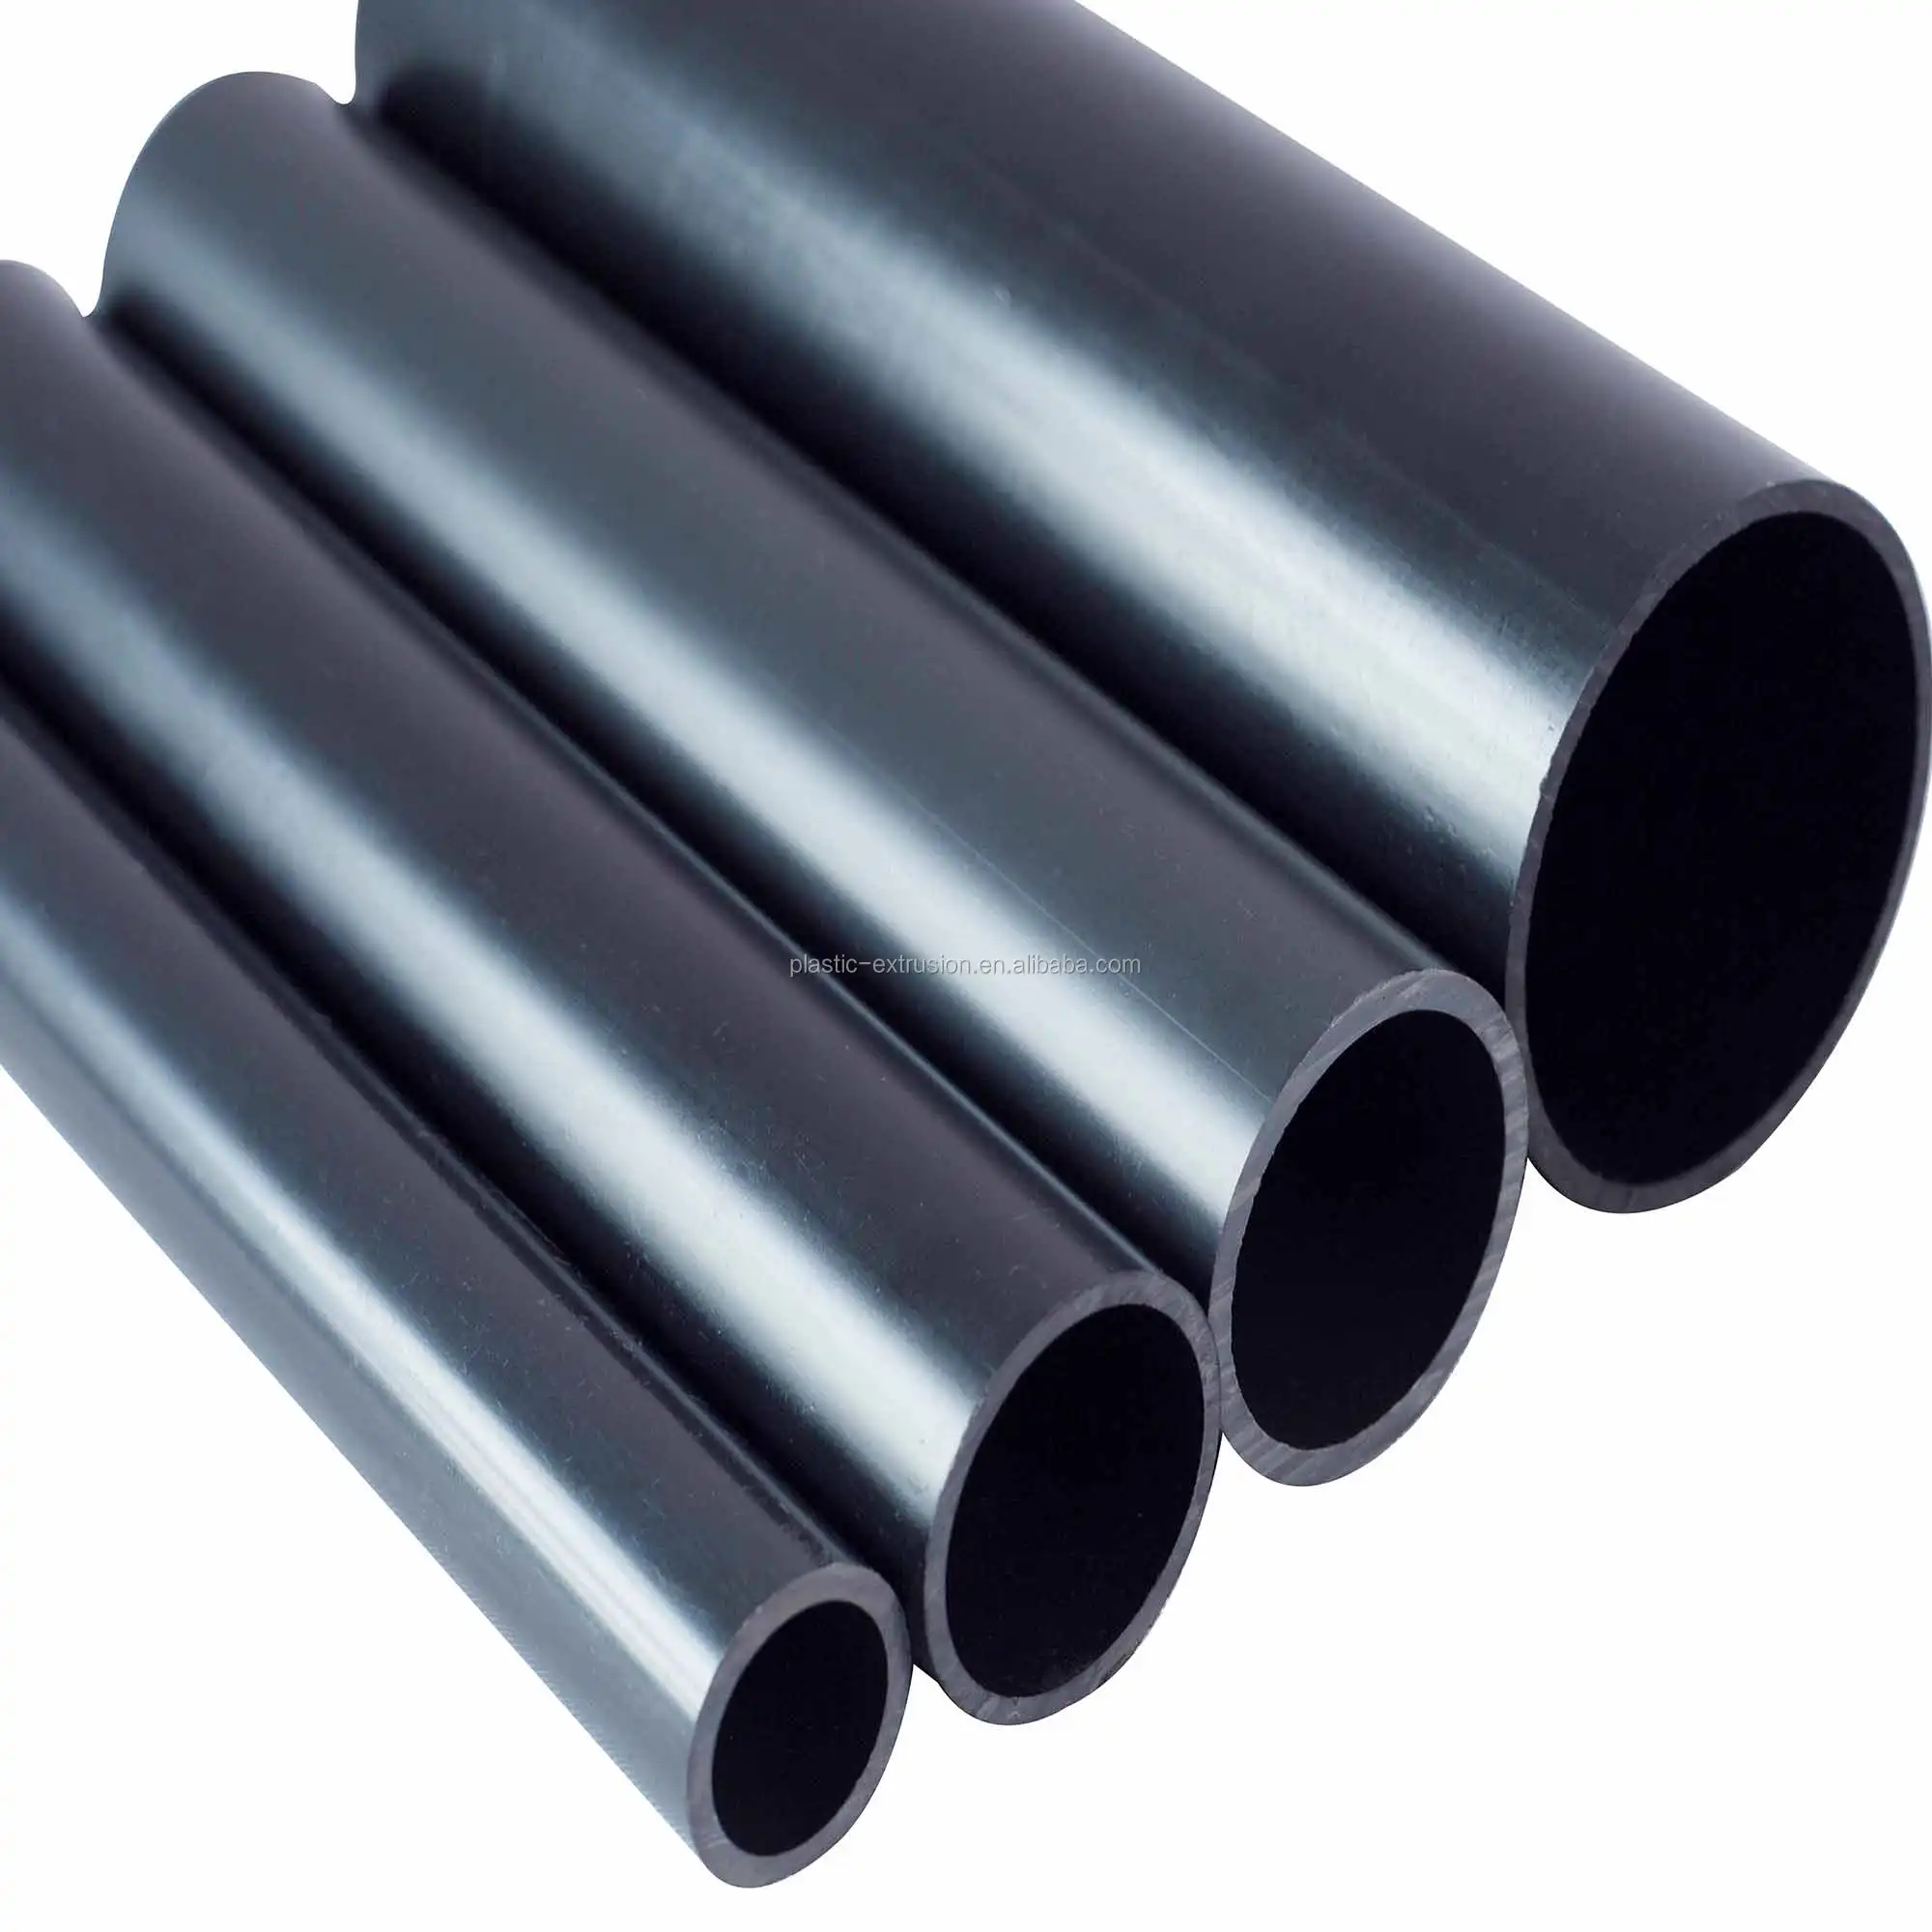 PVC electric wire duct pipe Plastic round profile rigid water pipe for sale High quality black ventilation pipe tube